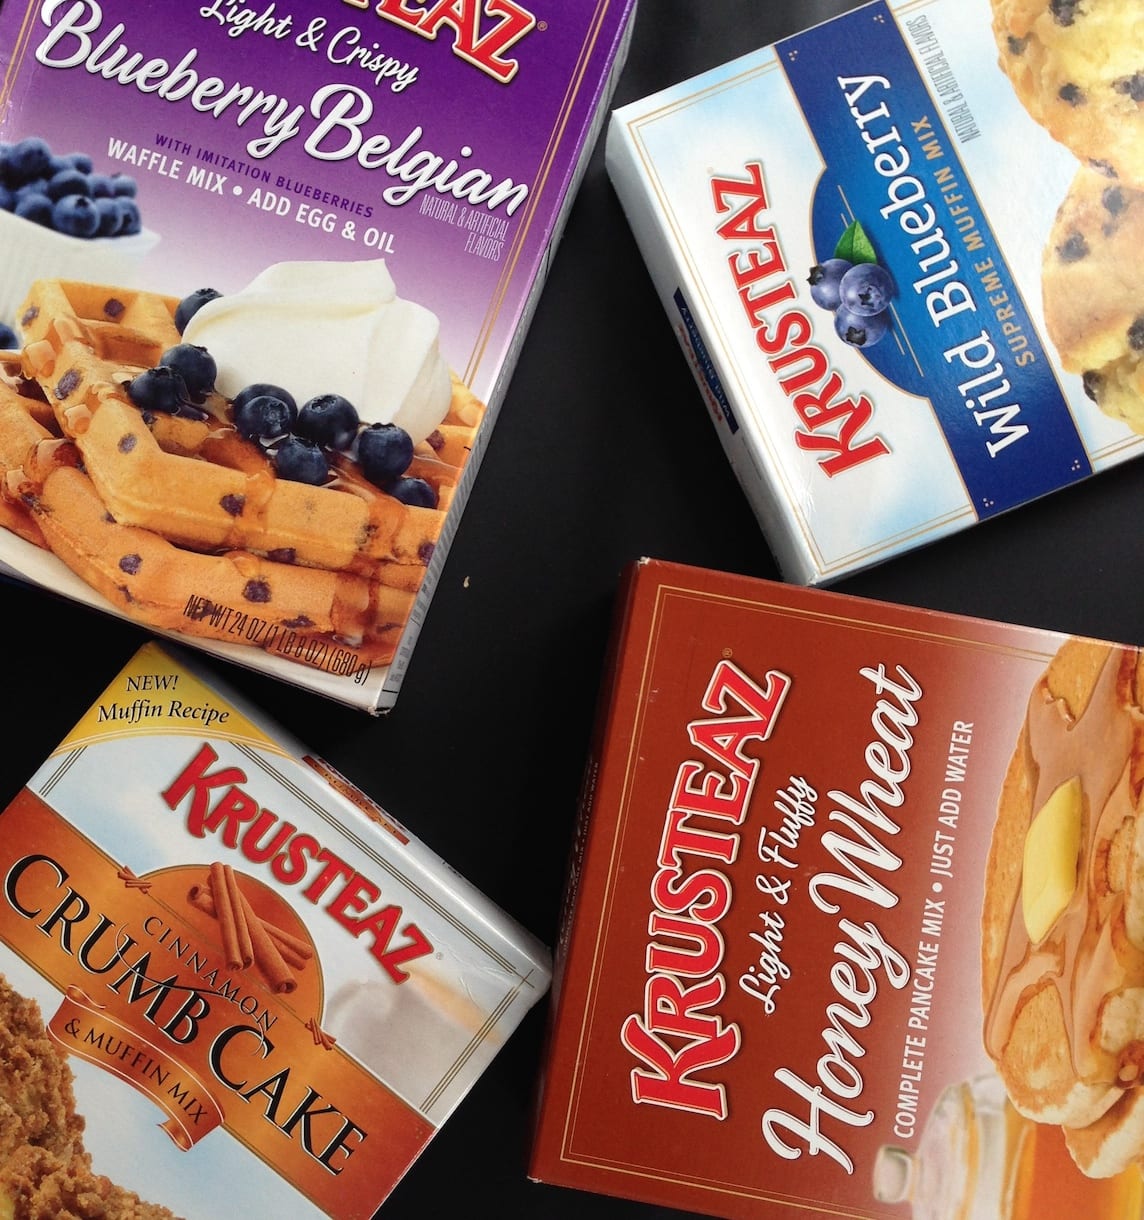 Join me in discovering fun, delicious ways to bake with Krusteaz mixes!